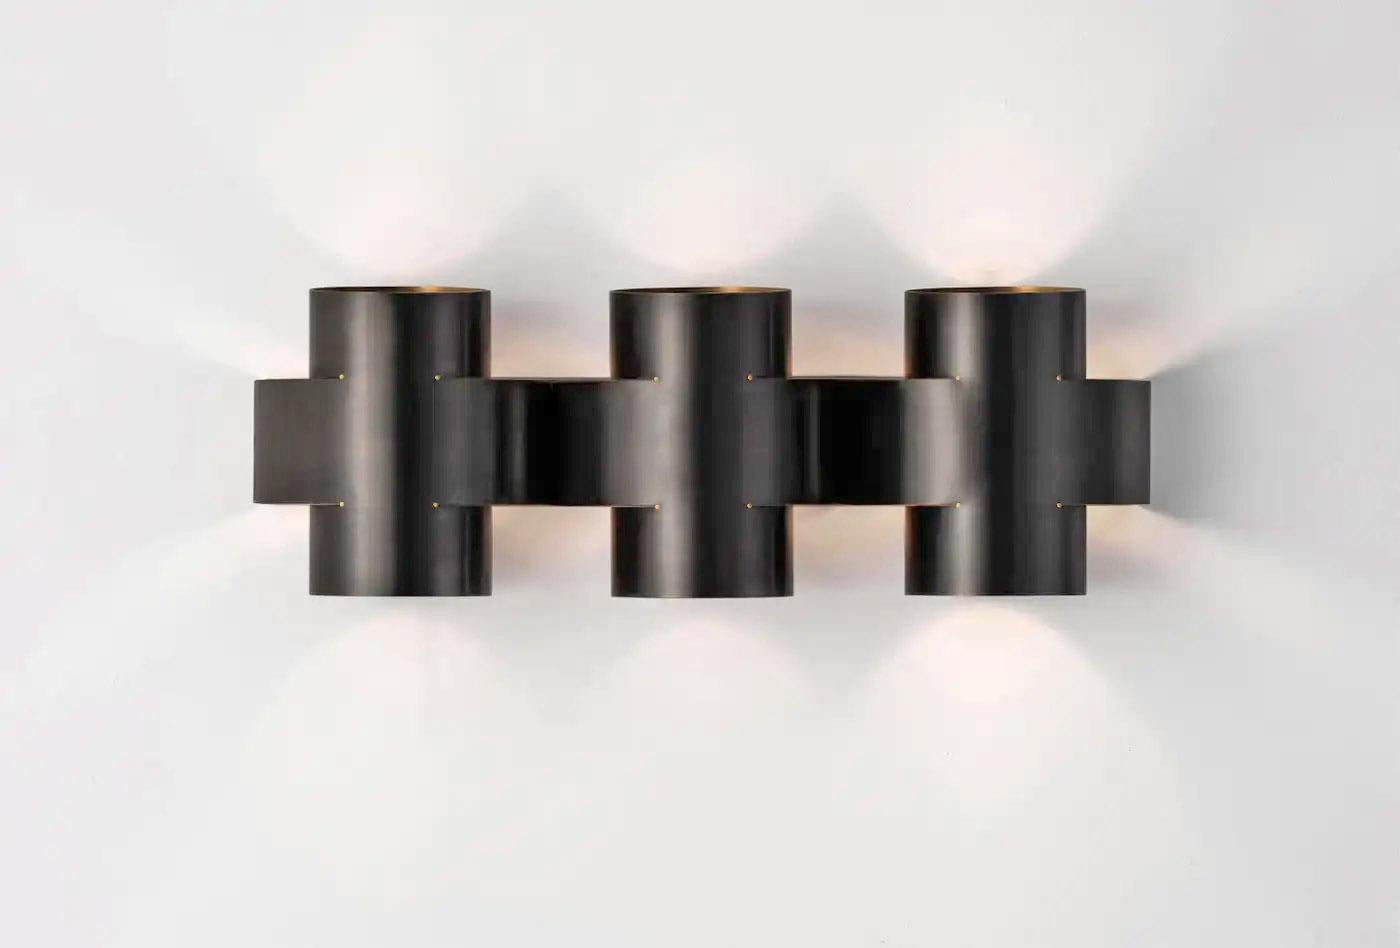 Contemporary Burnt Brass Wall Sconce, Plus Three Large Lamp by Paul Matter

PLUS Series is a new range of appliqués by Paul Matter that feature a simple shape in singular and repetitive arrangements. A 3-Dimensional plus is formed out of a single